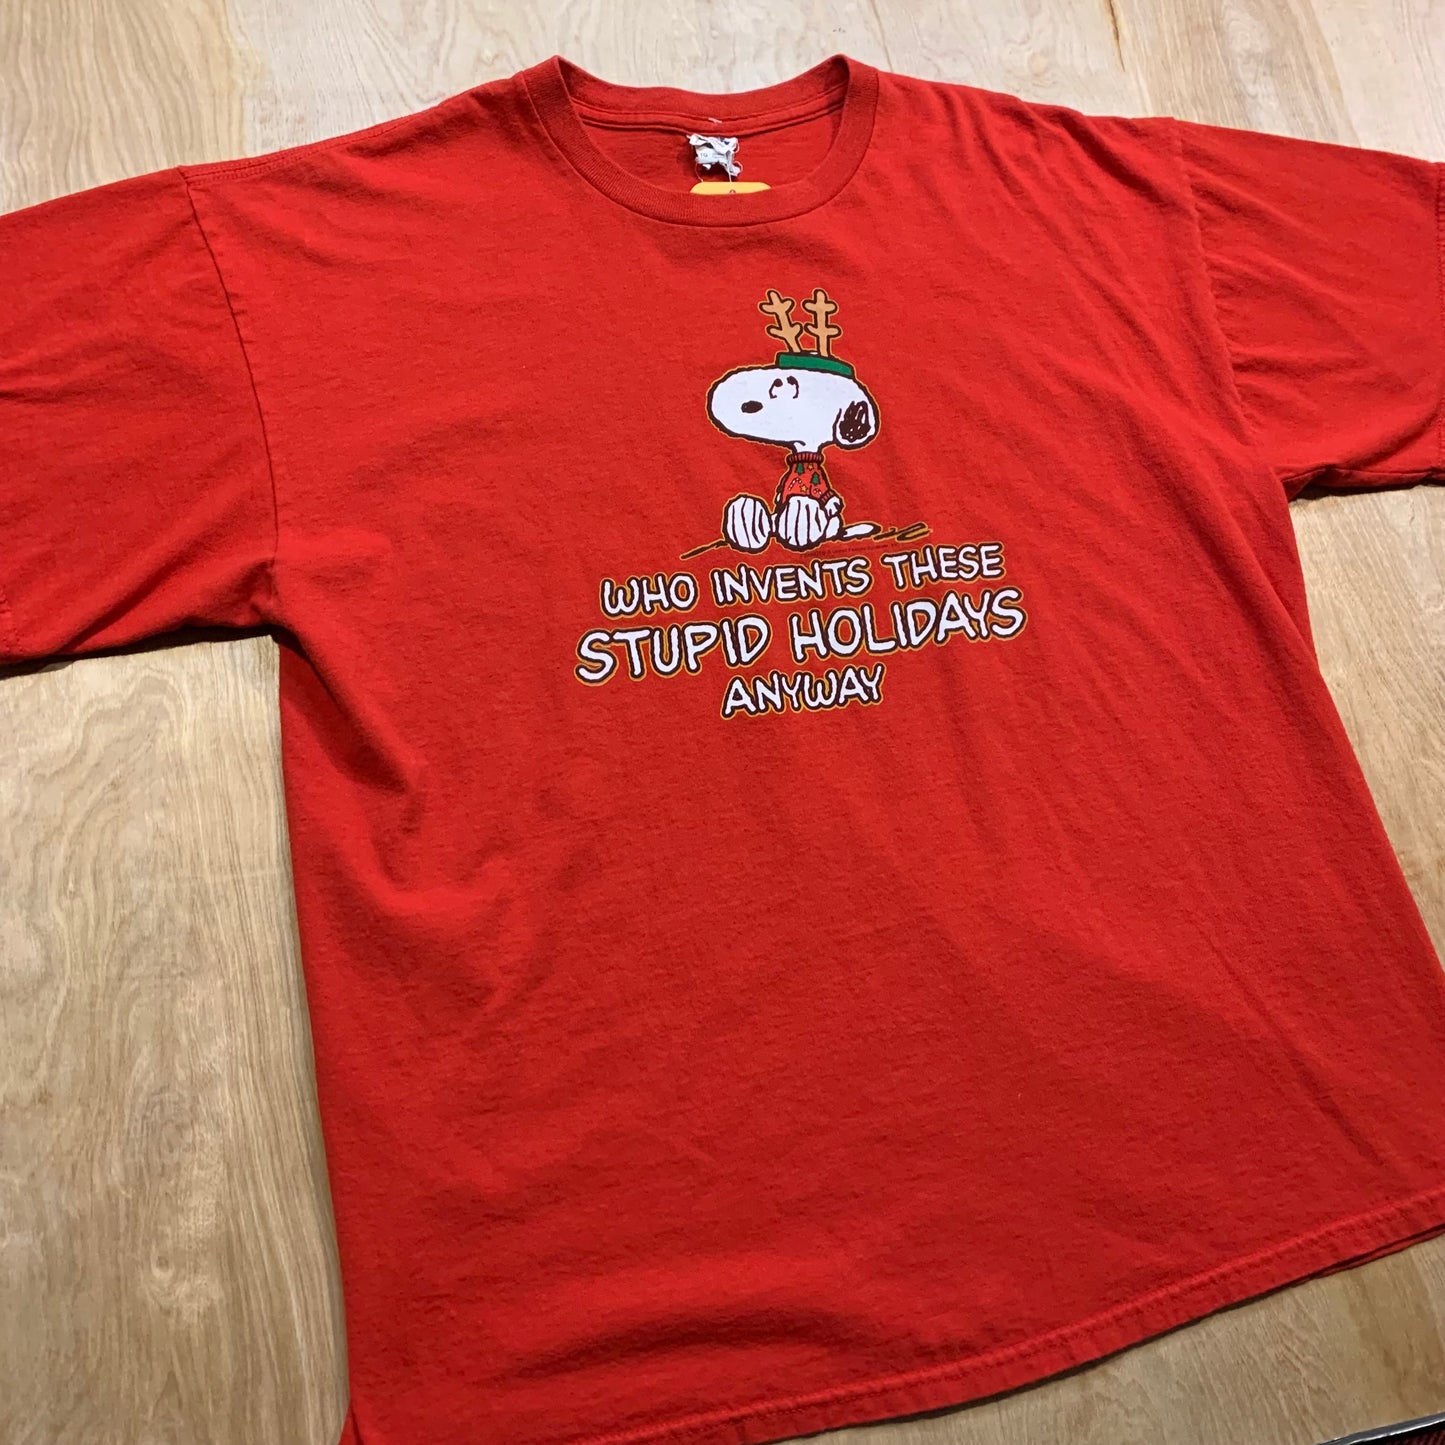 Snoopy "Who Invents These Stupid Holidays Anyway" T-Shirt